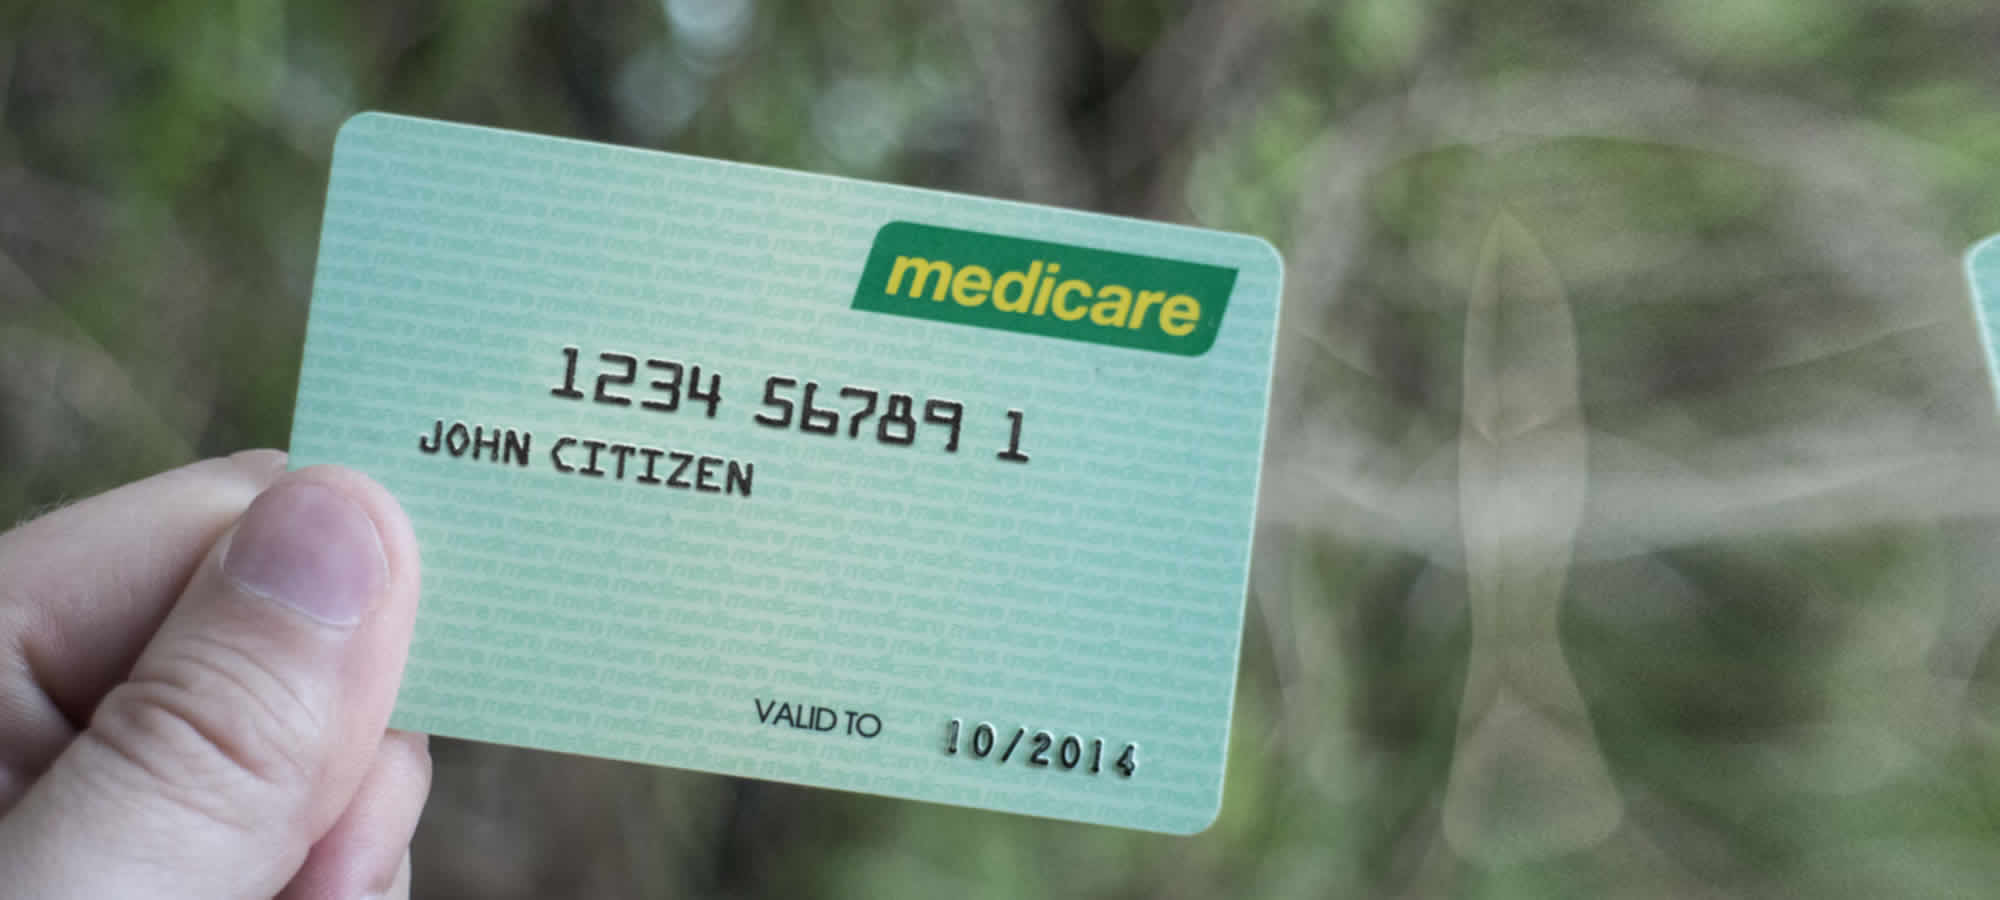 Medicare access review after security breach • The Medical Republic